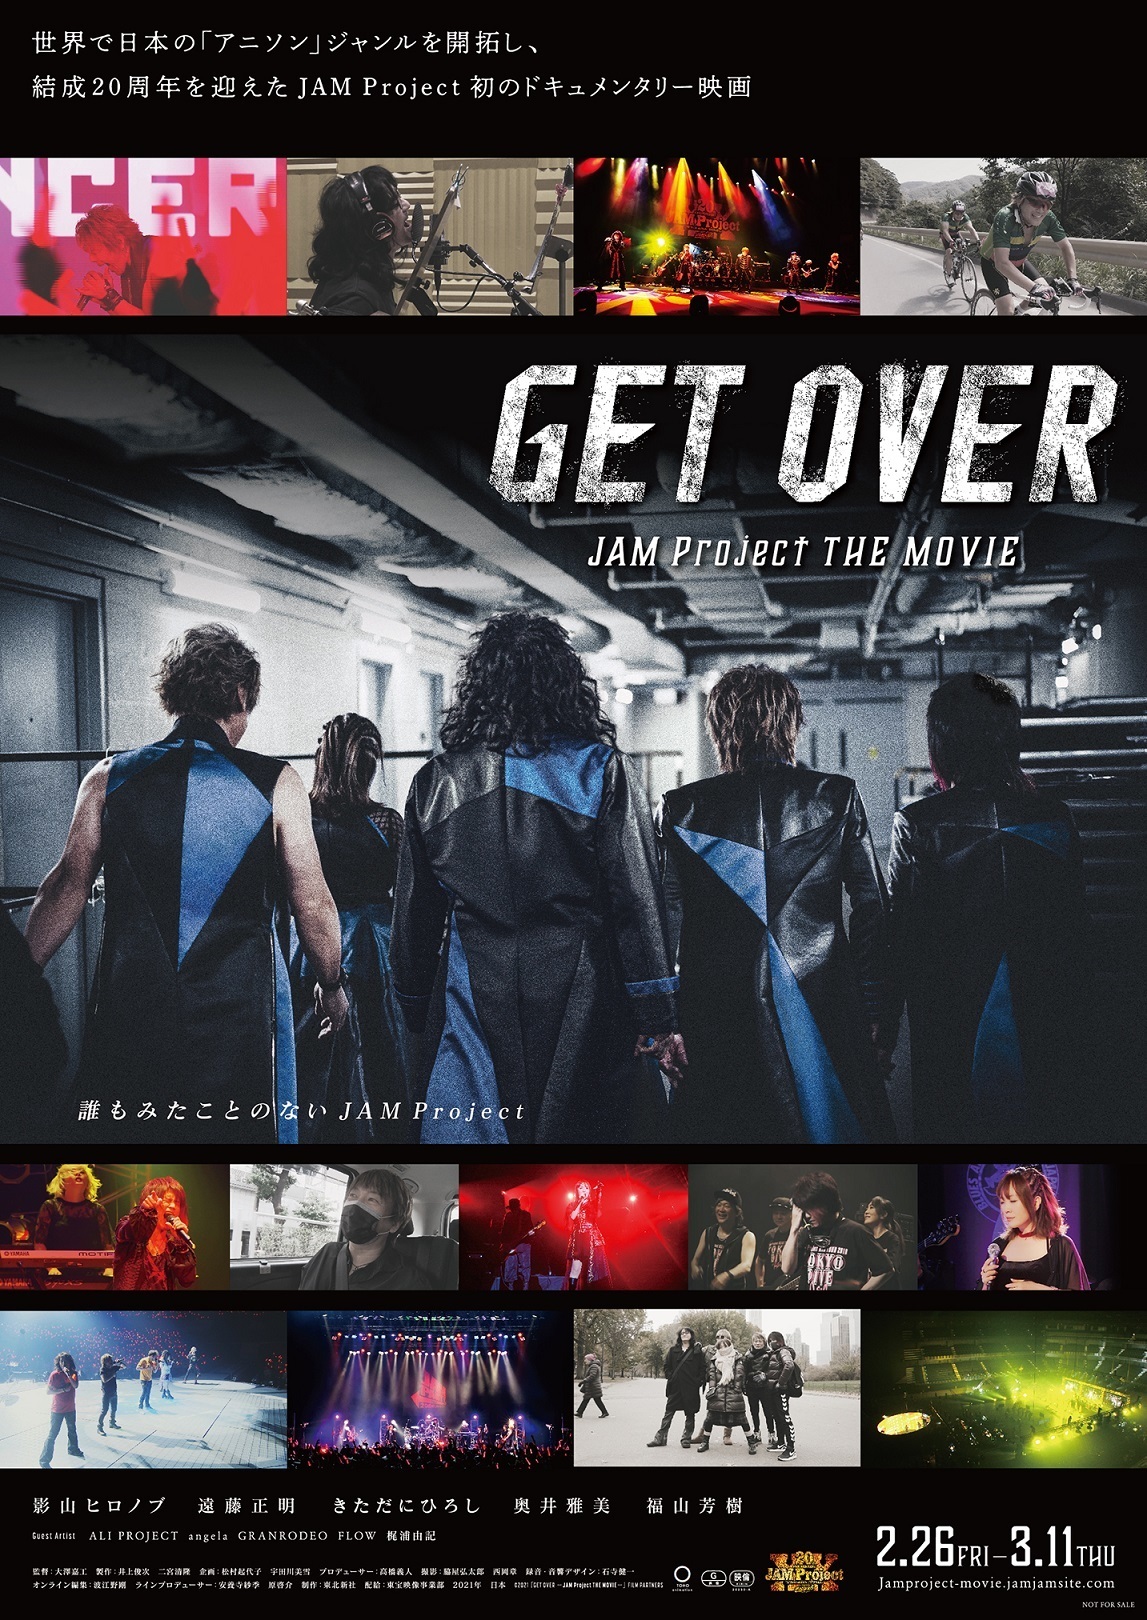   (C)2021「GET OVER －JAM Project THE MOVIE－」FILM PARTNERS